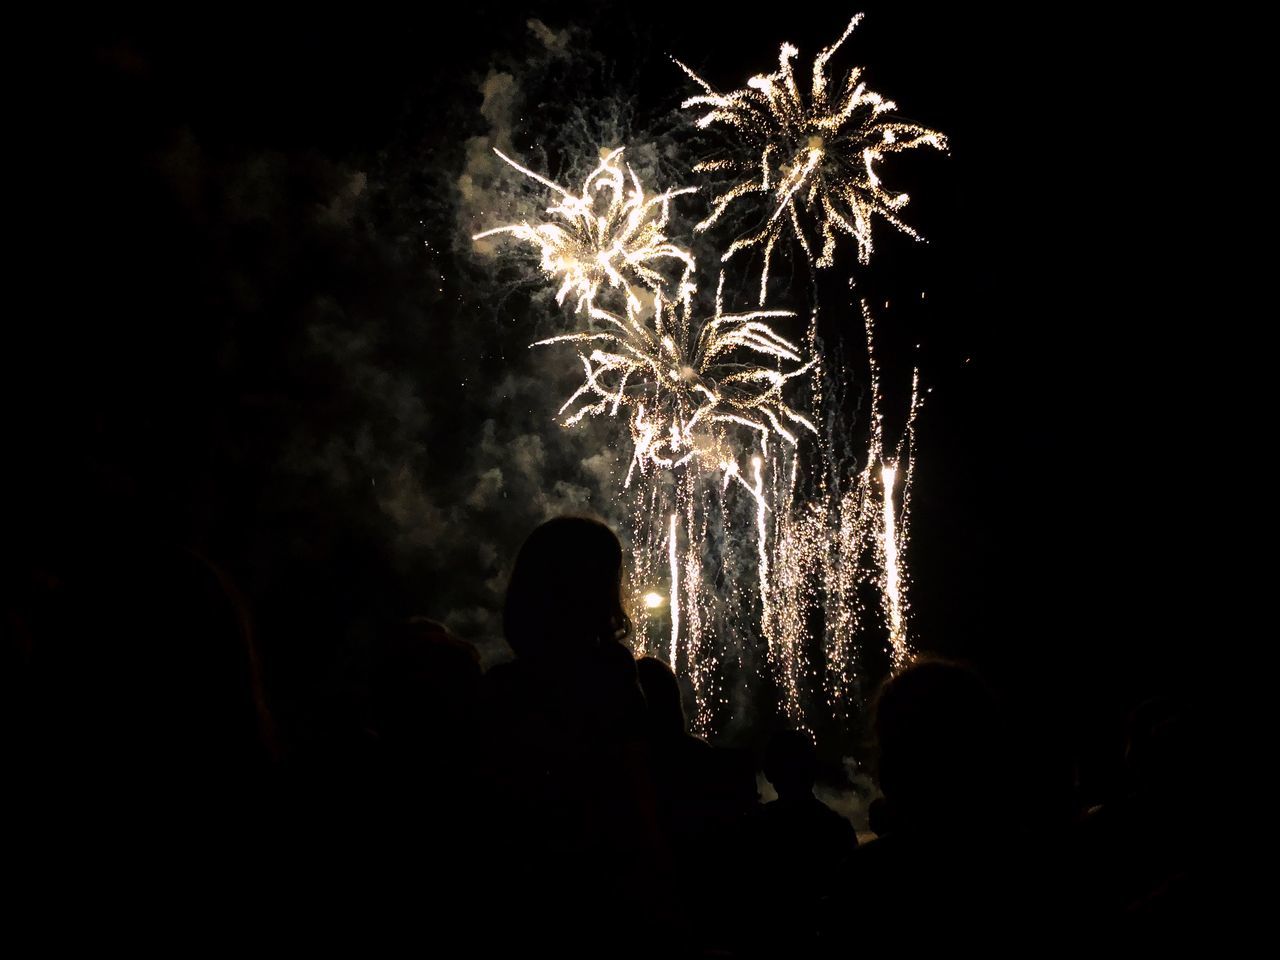 LOW ANGLE VIEW OF FIREWORK DISPLAY